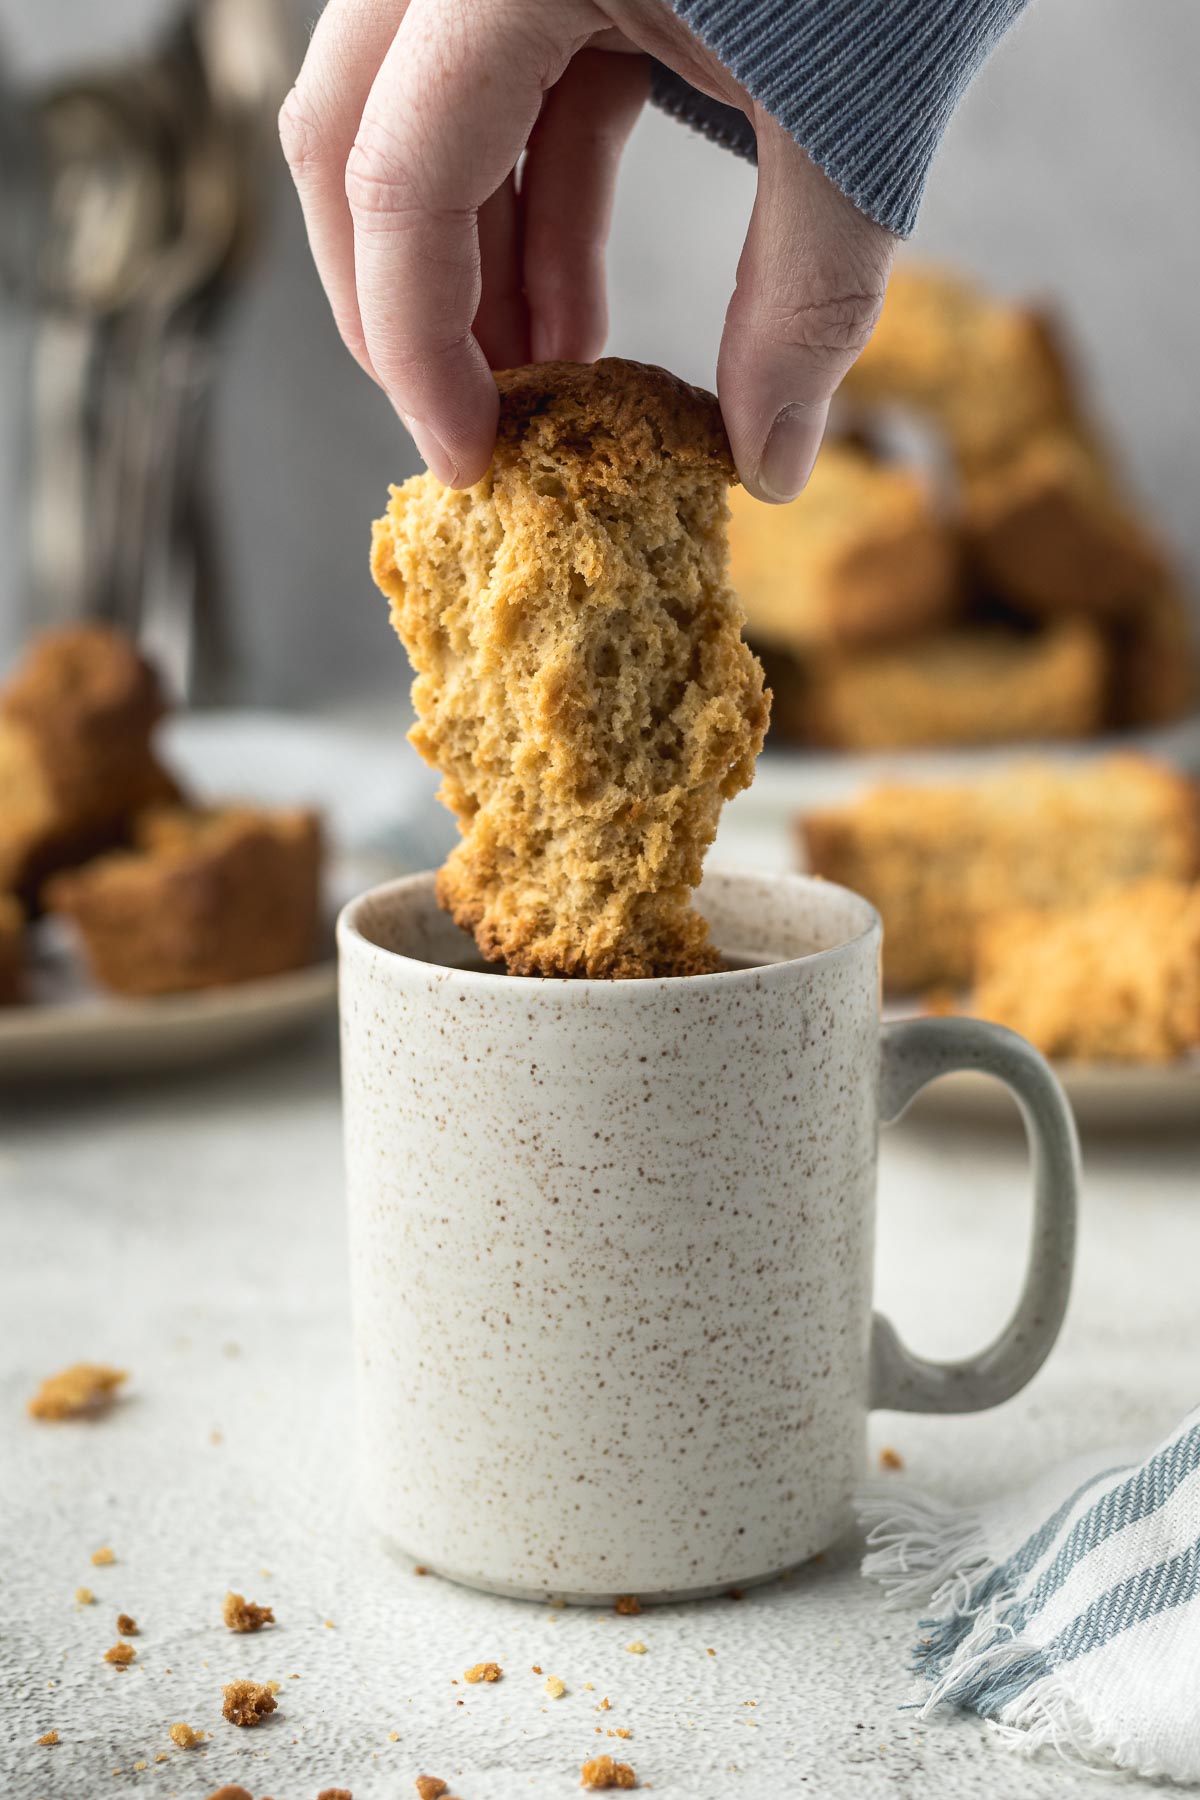 Buttermilk rusk being dunked into a cup of coffee.